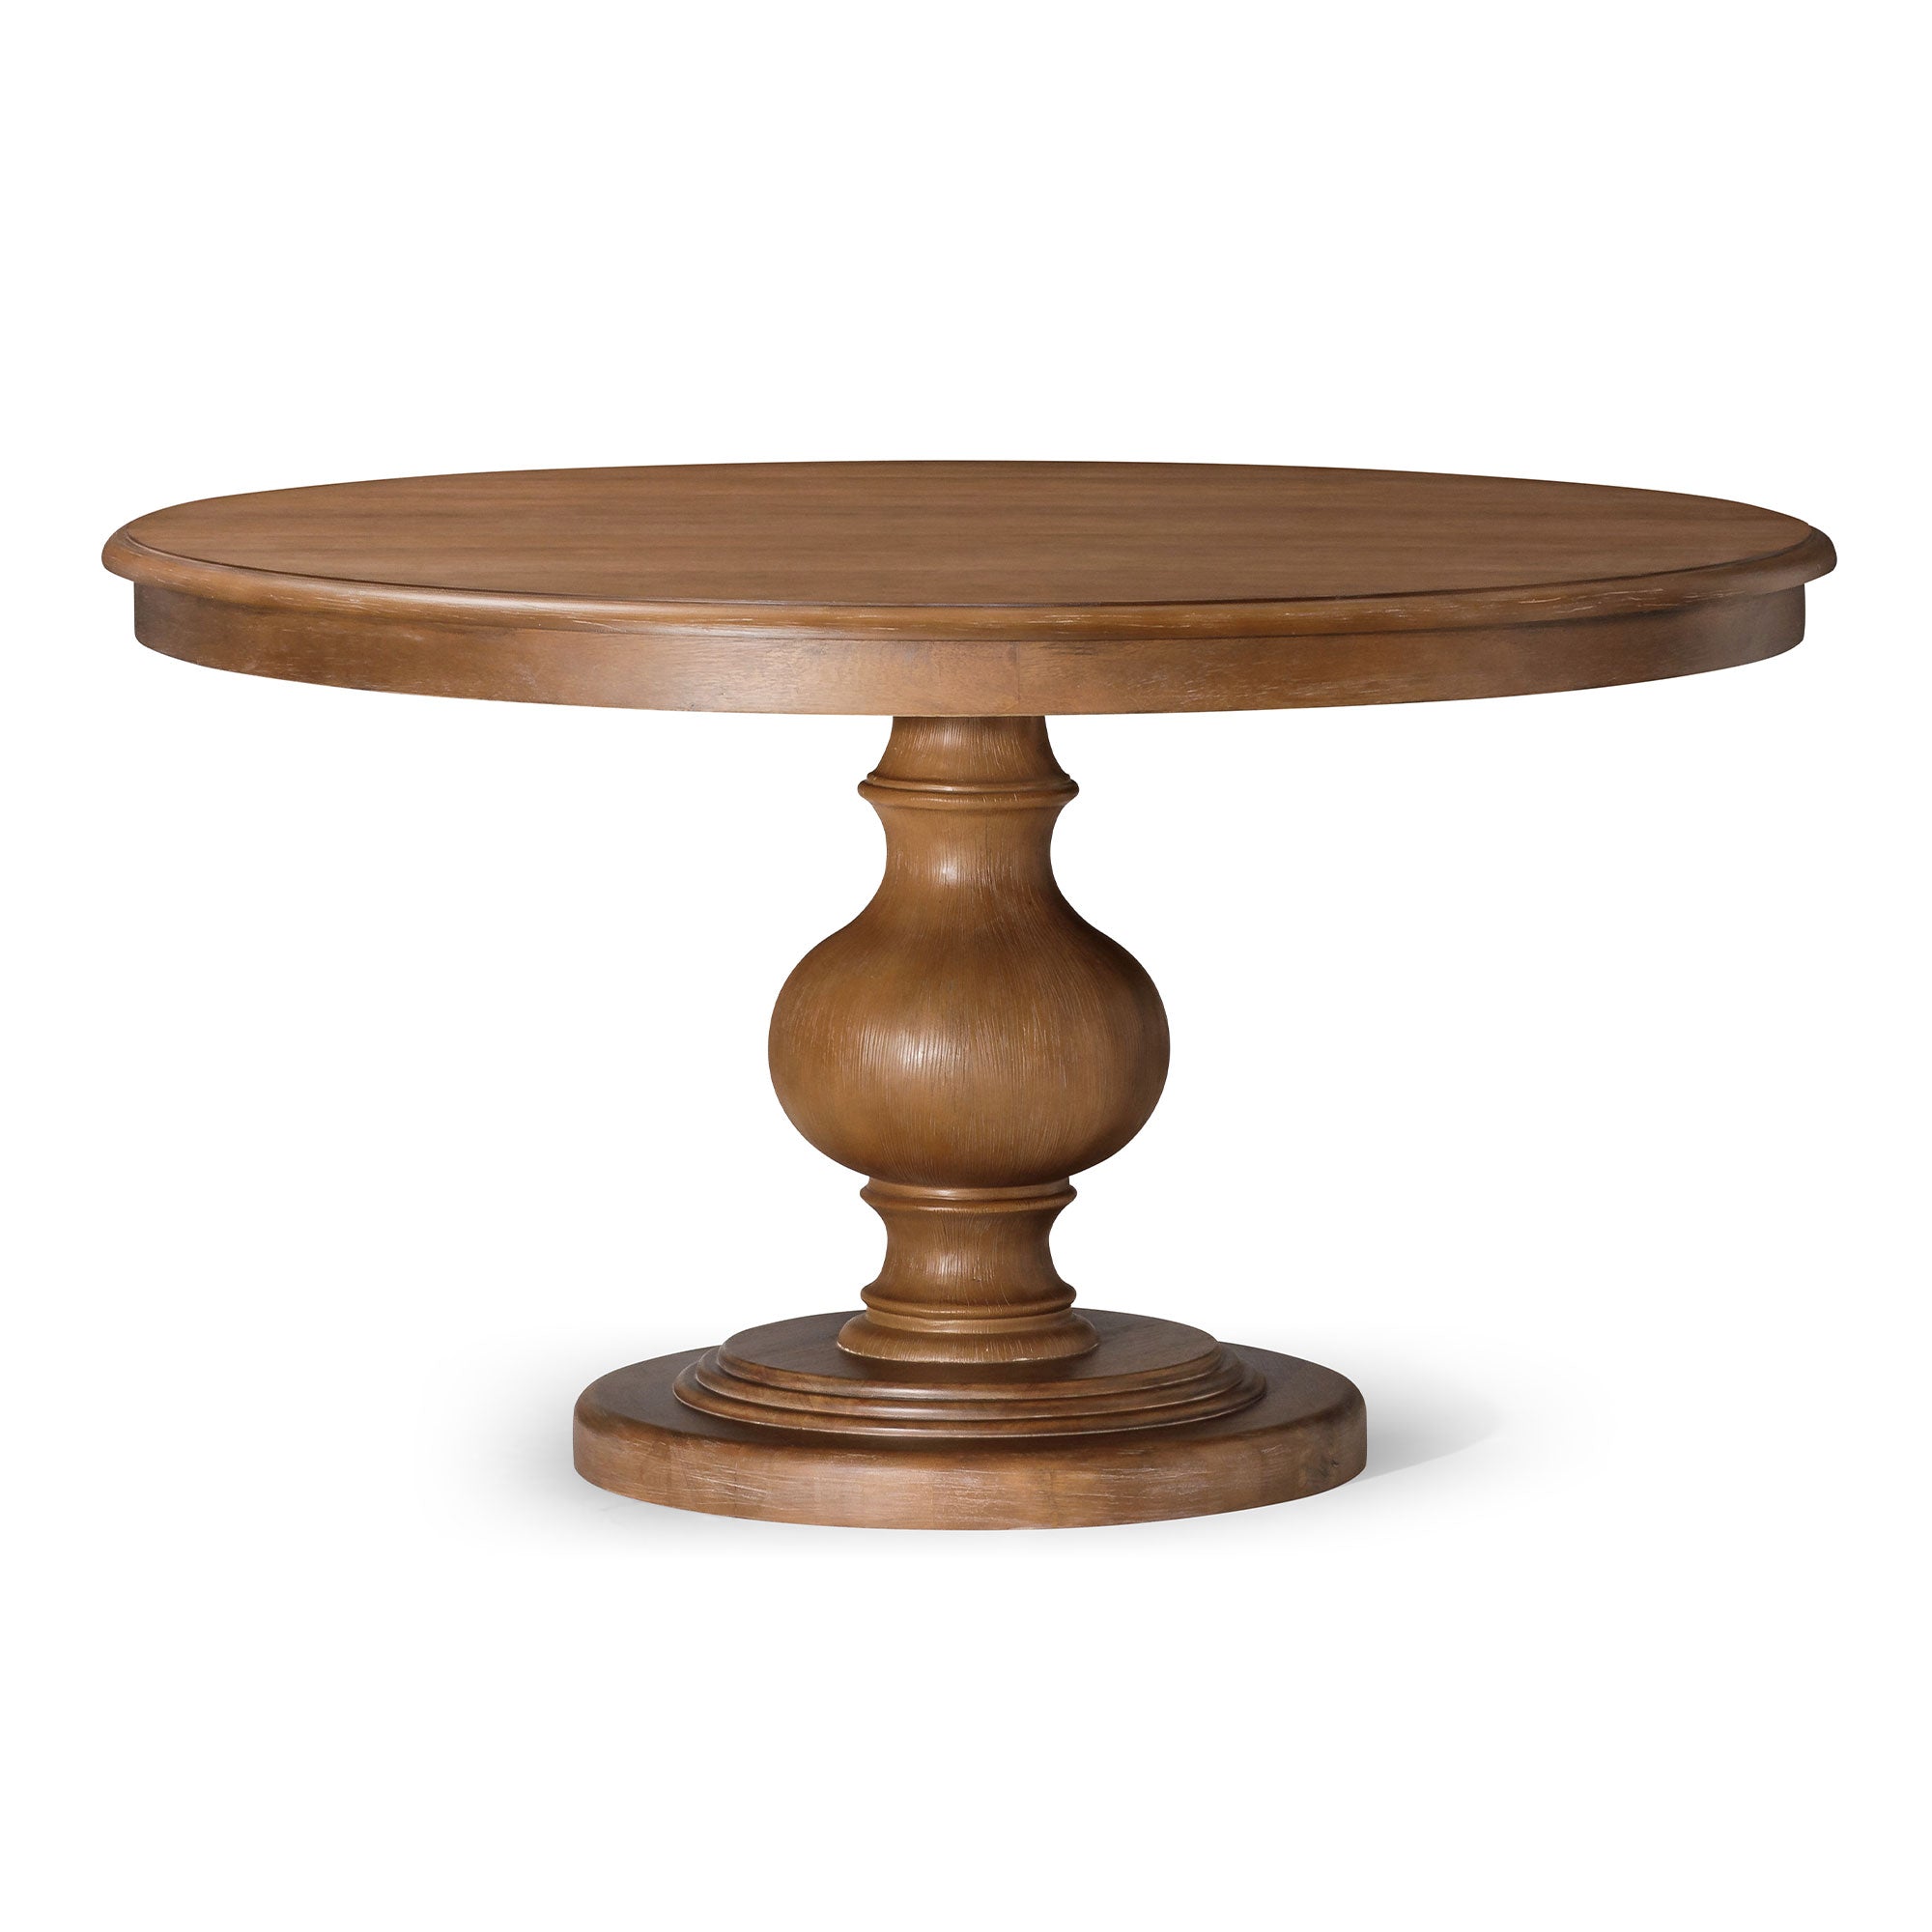 Zola Classical Round Wooden Dining Table in Antiqued Natural Finish in Dining Furniture by Maven Lane